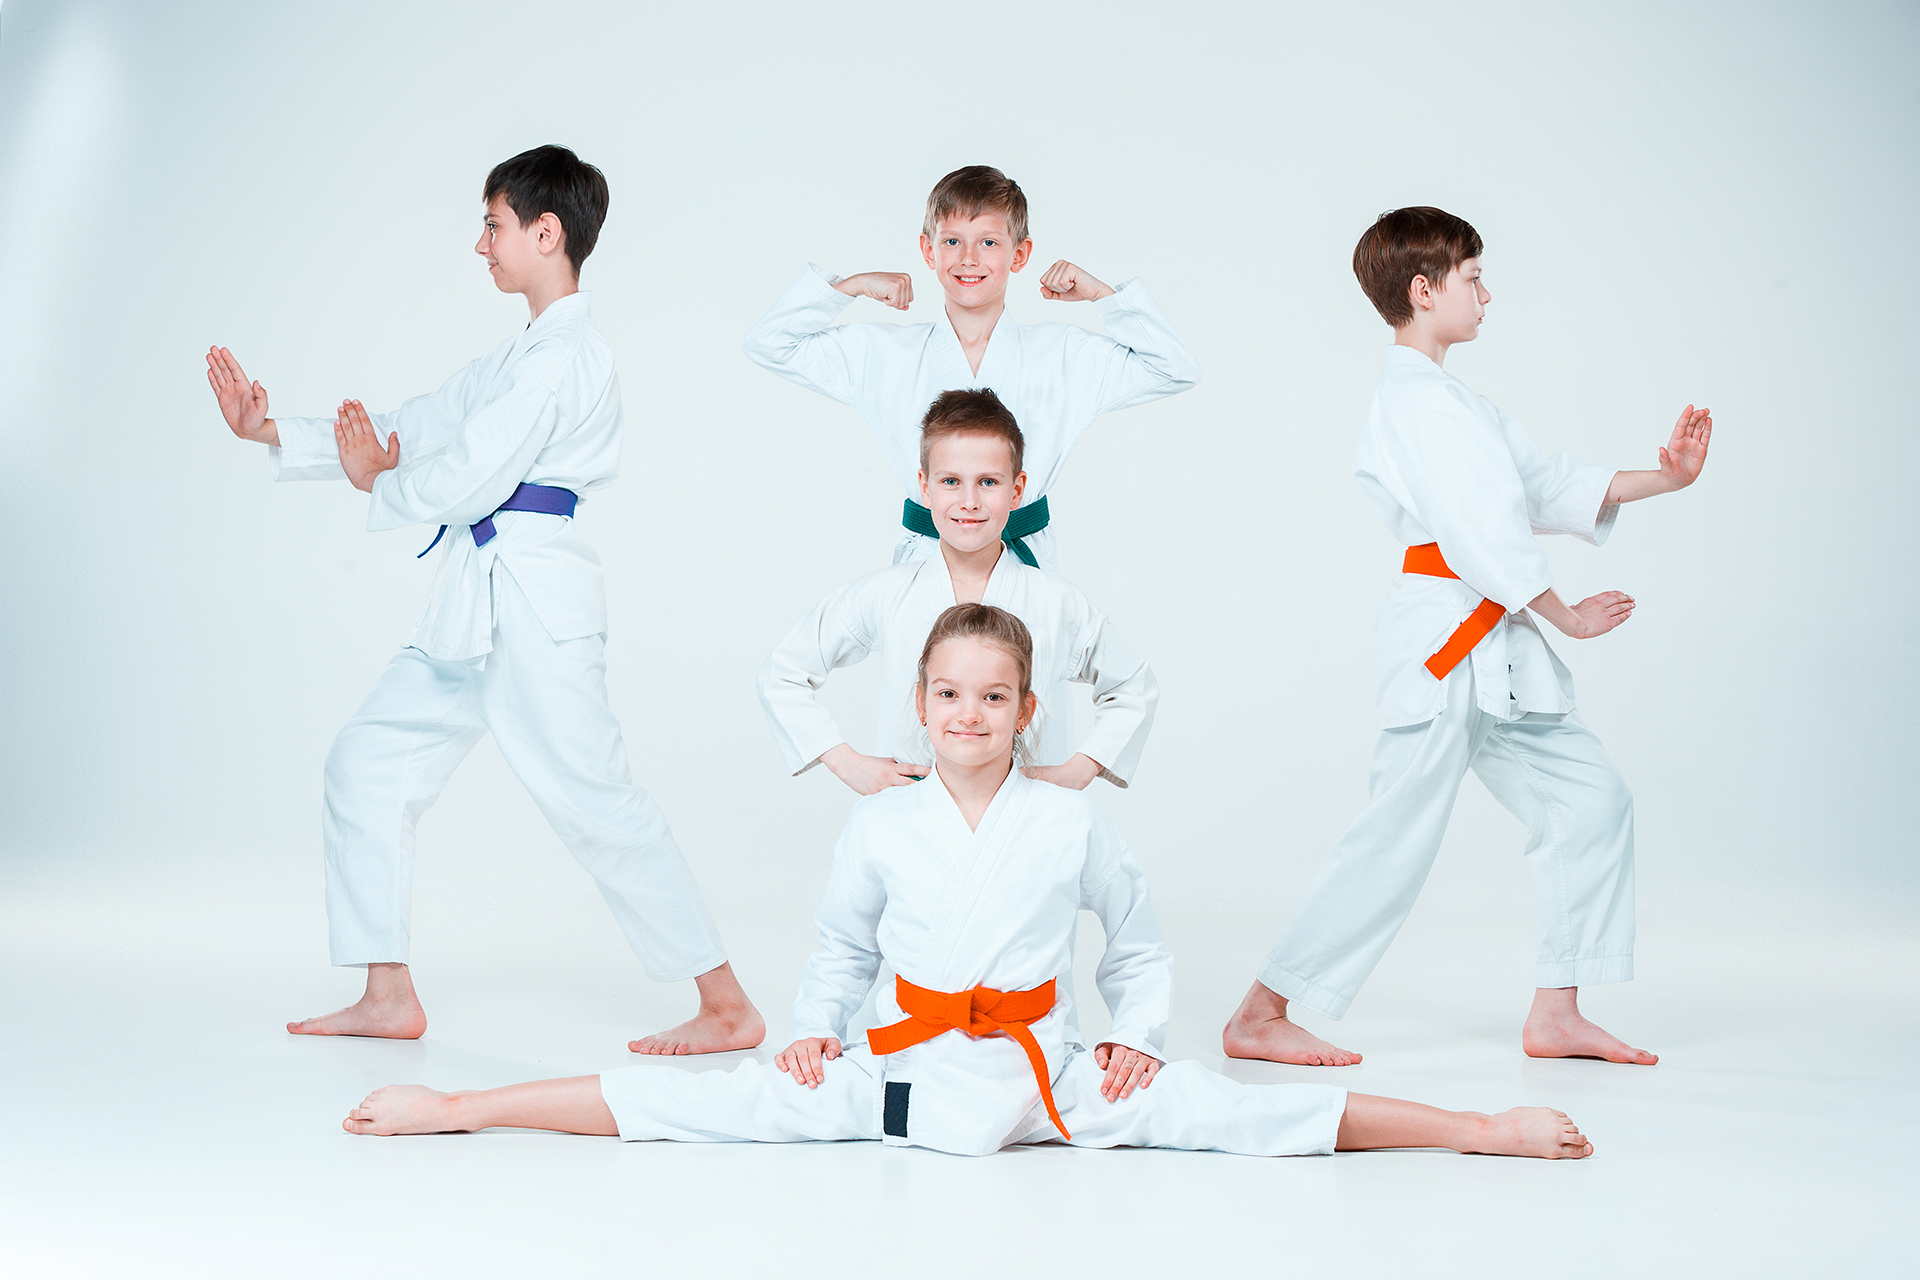 Ten martial arts you can think of learning - NL Builders - Real Estate